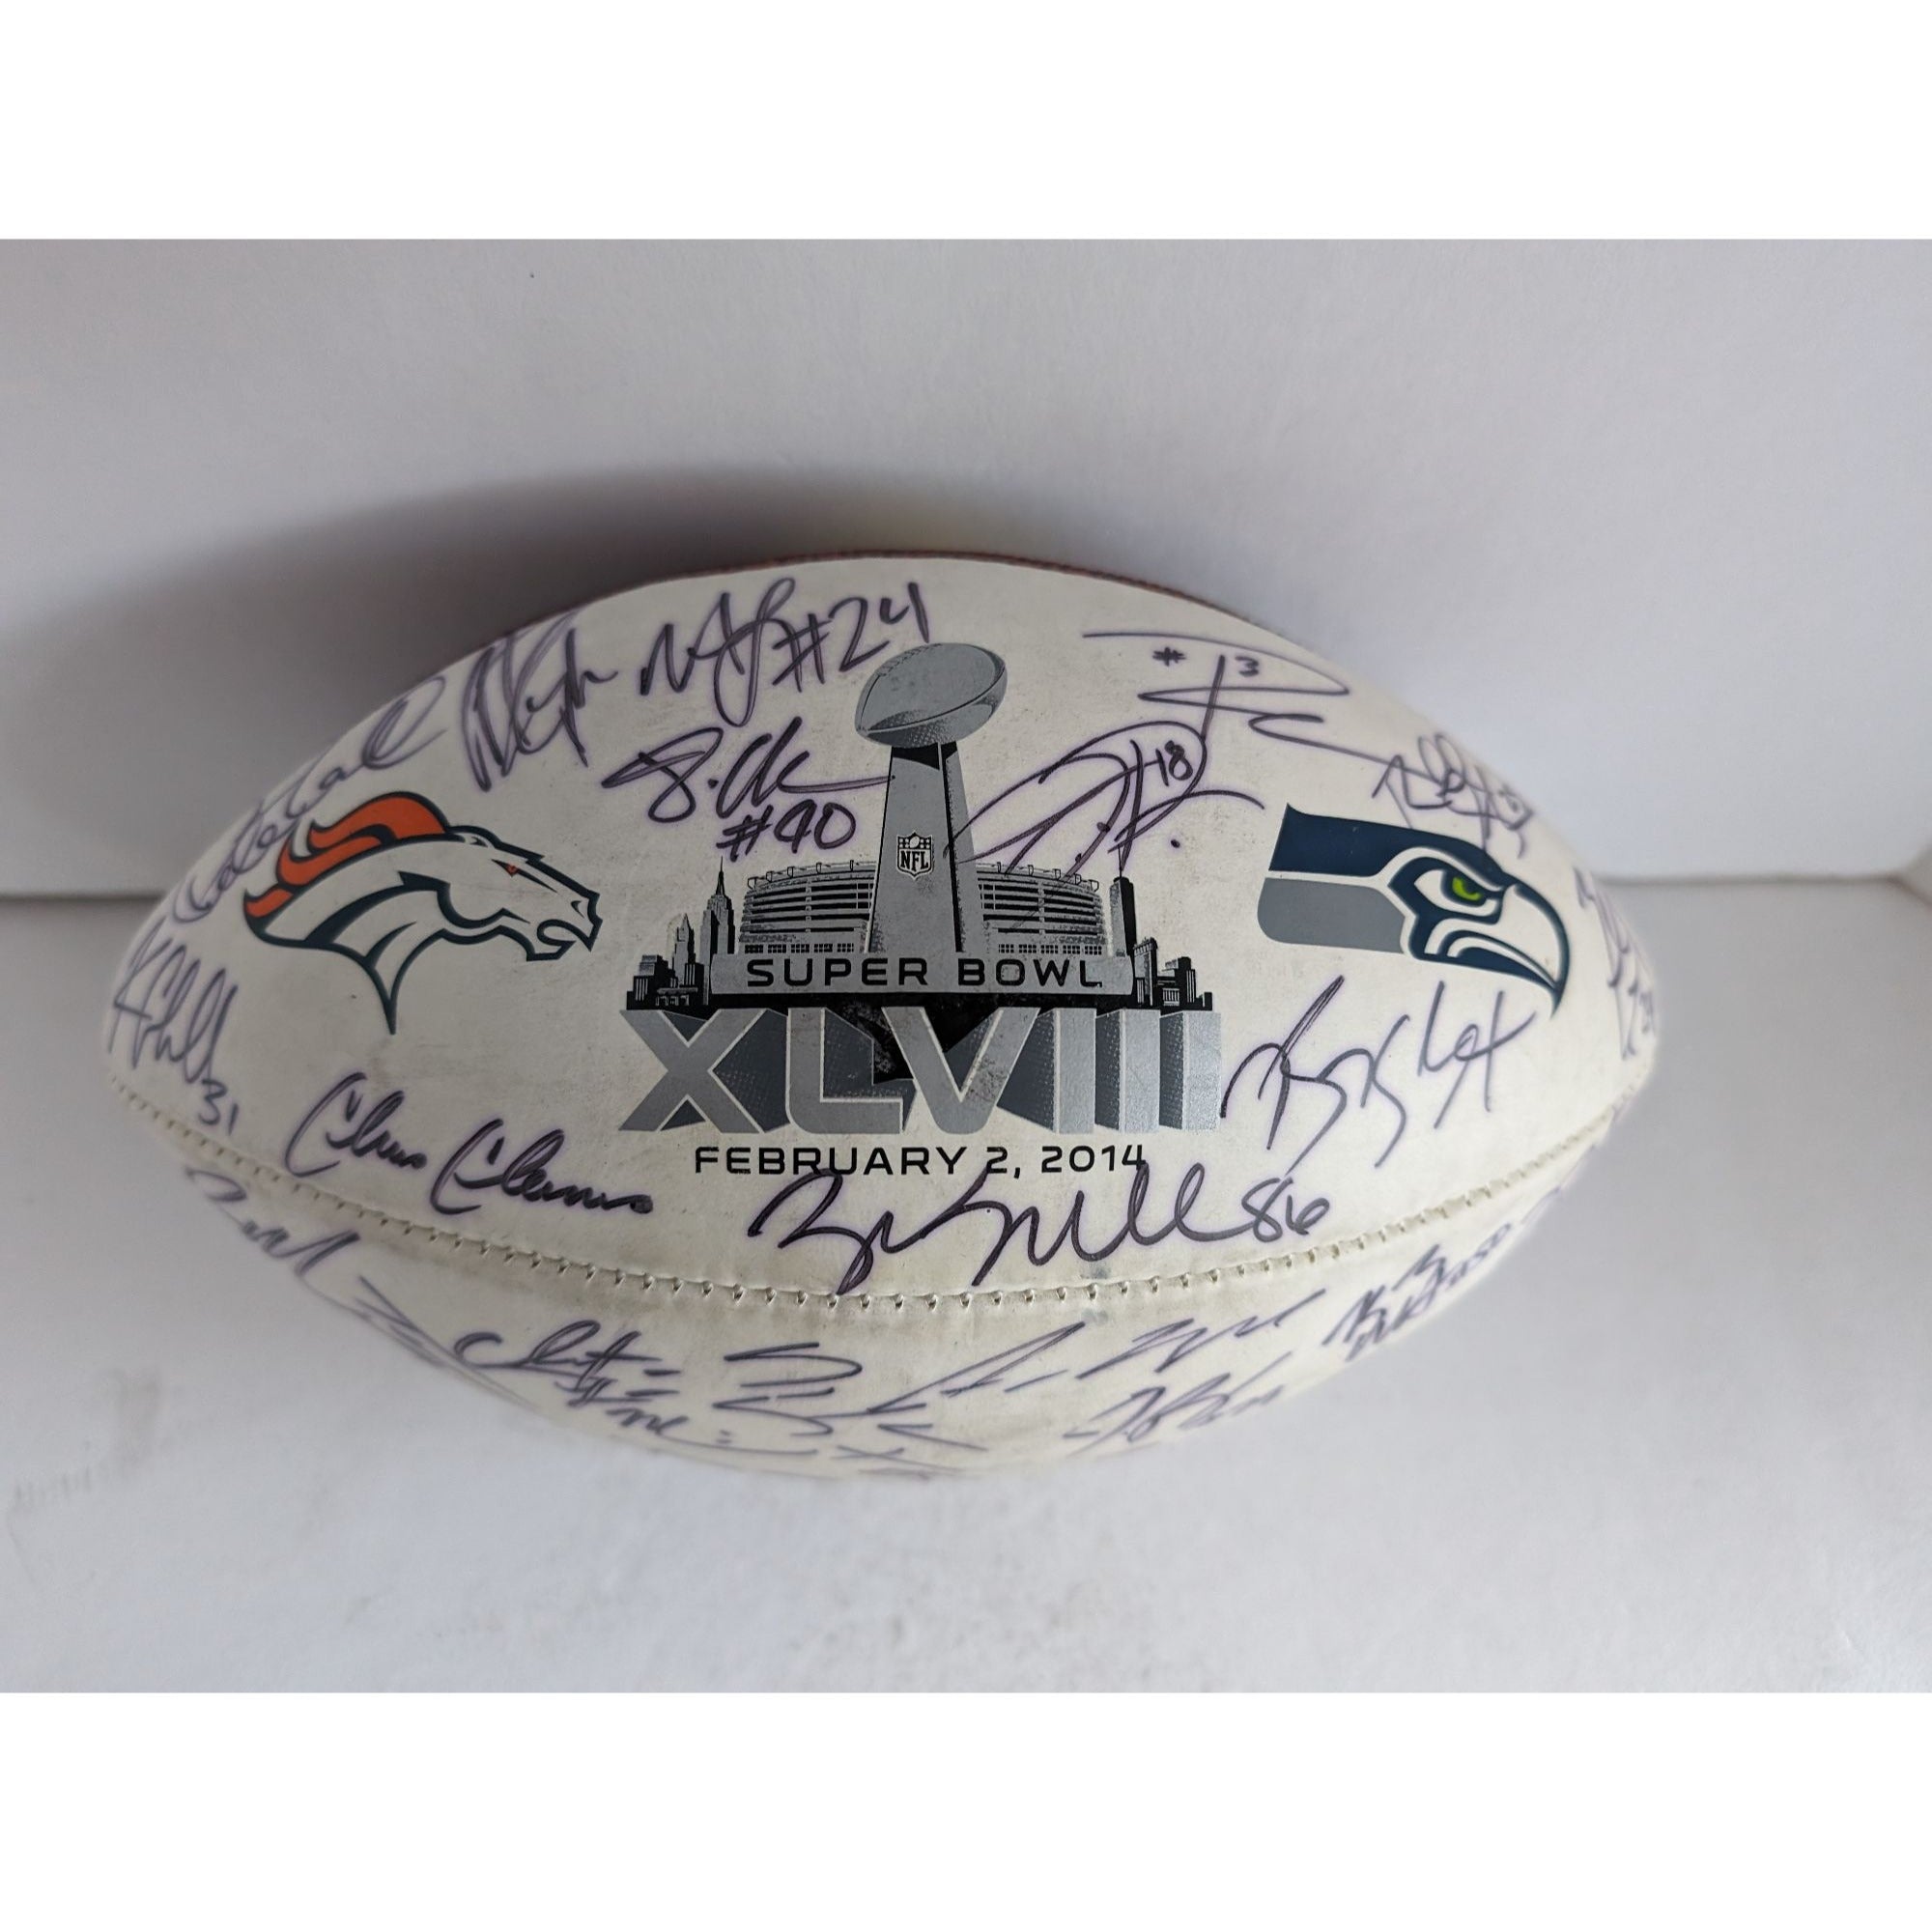 Seattle Seahawks 2013-2014 Super Bowl champions team signed football 40 signatures Russell Wilson Marshawn Lynch Pete Carroll the Legion of